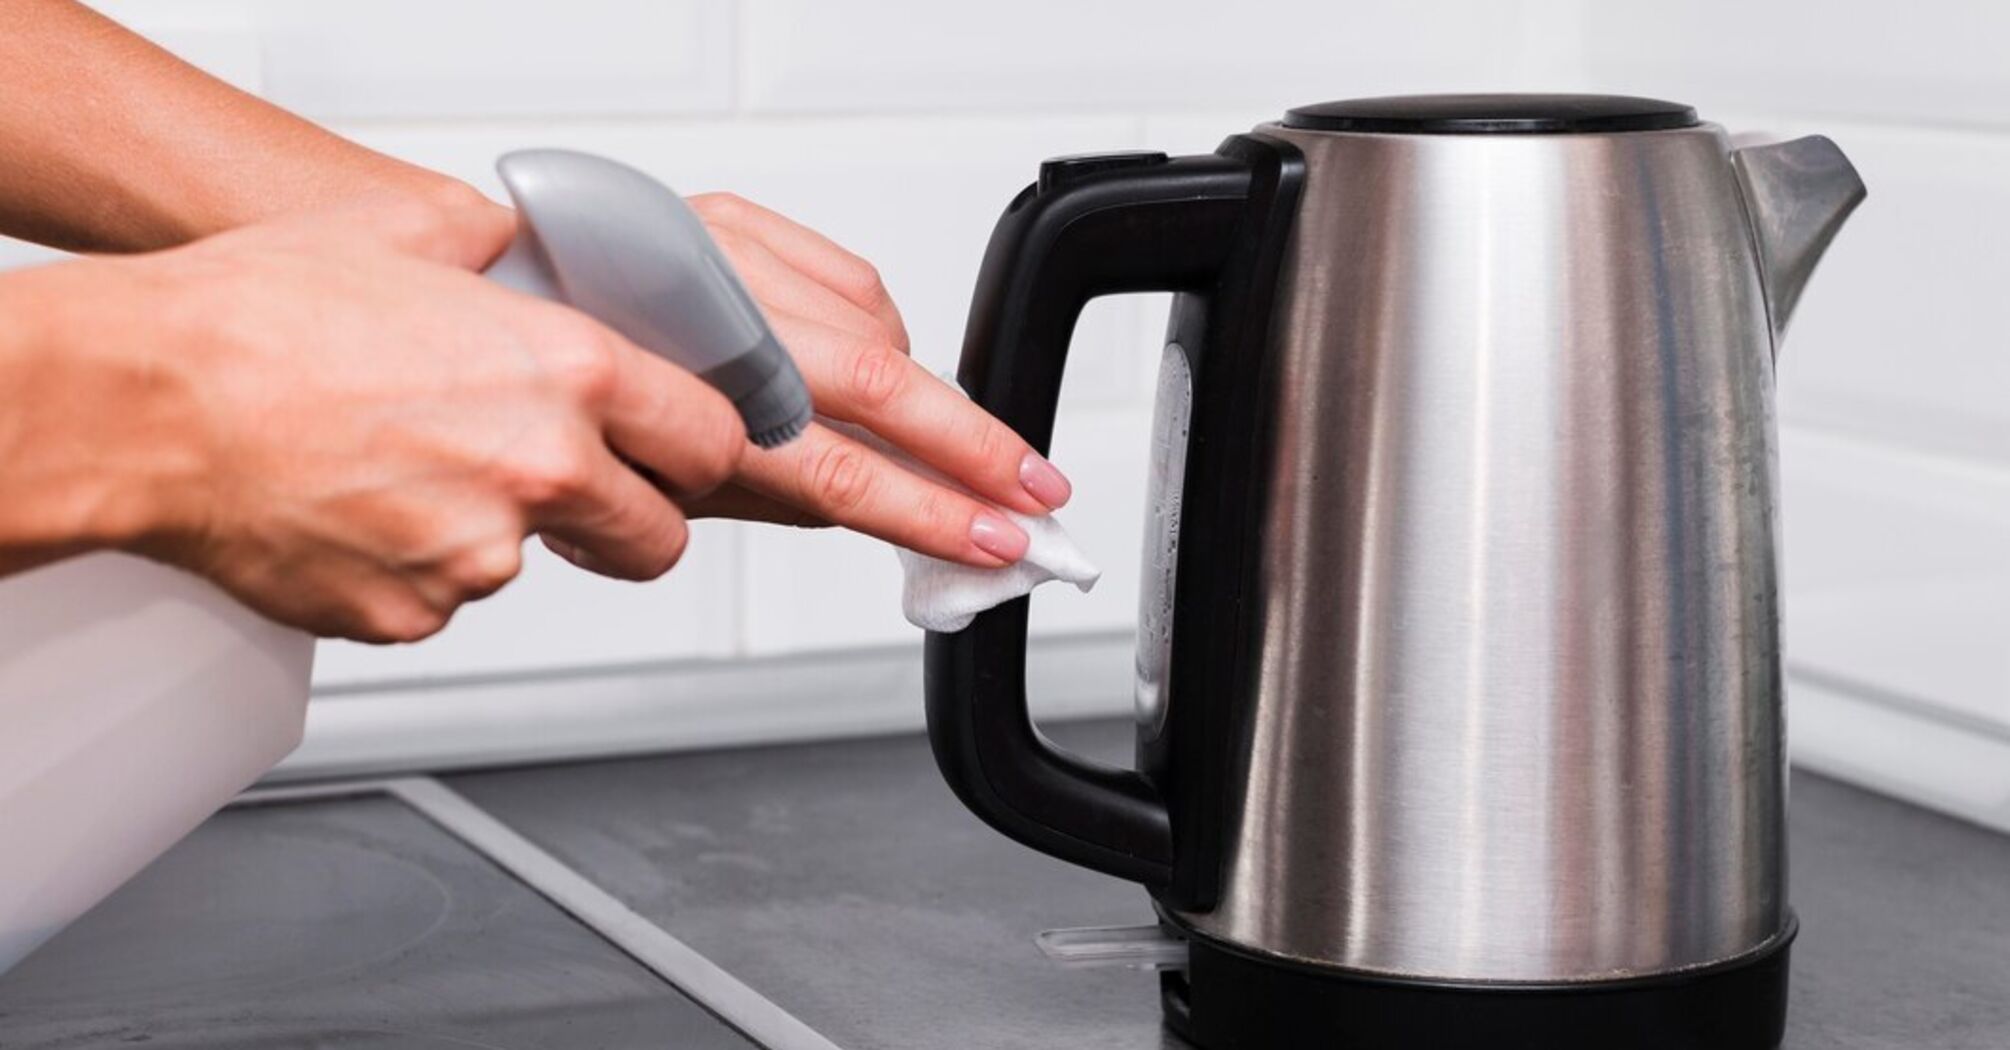 How to quickly descale a kettle: 4 useful tips